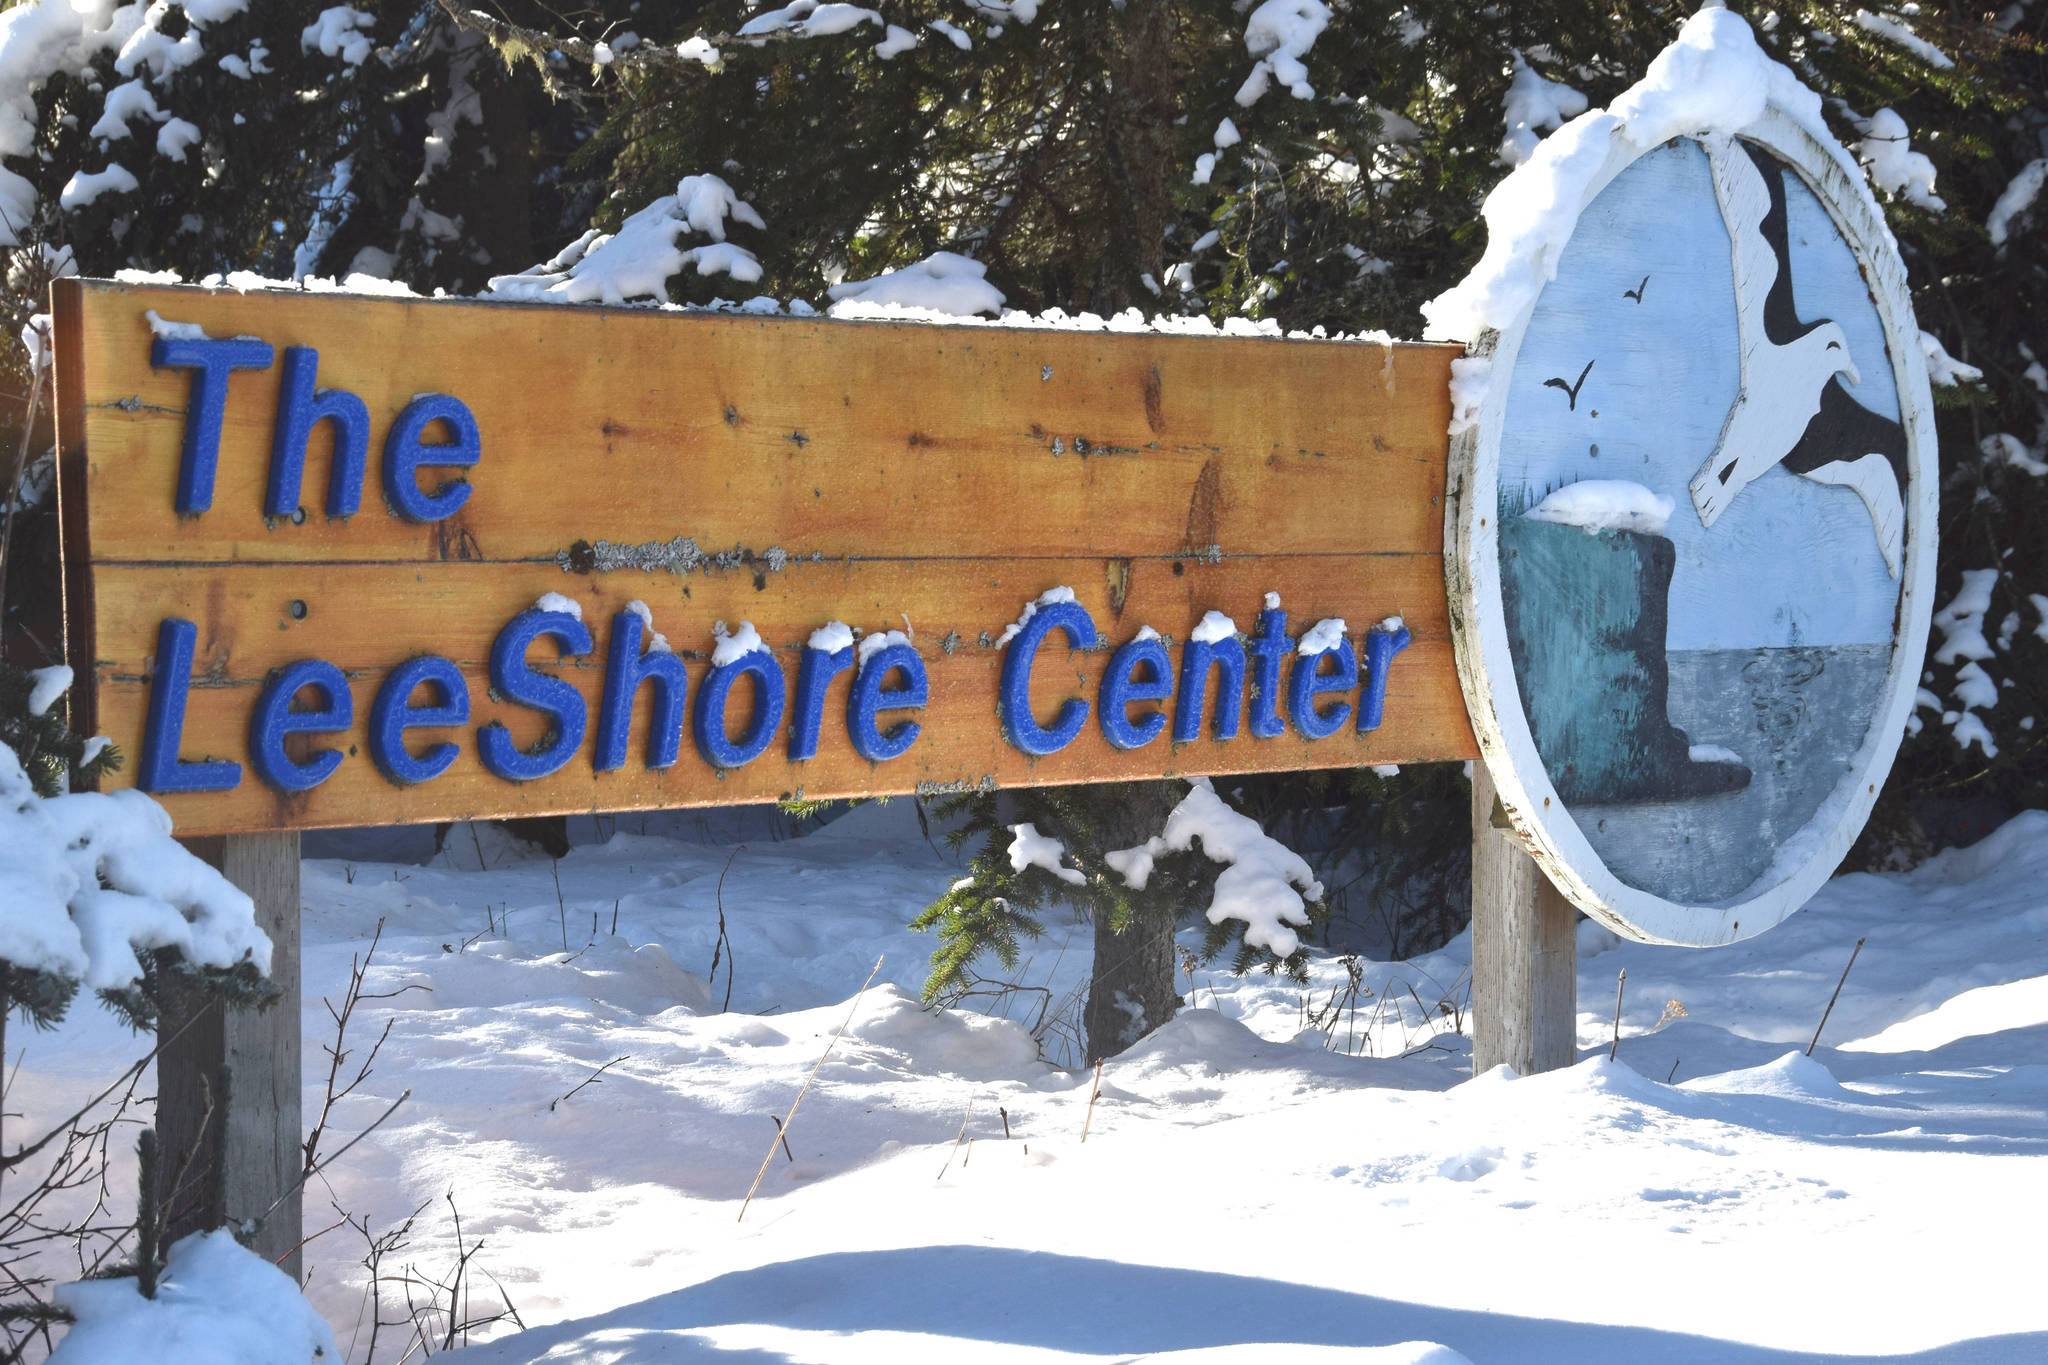 The LeeShore Center provides transitional housing services for homeless victims of domestic violence and sexual assault on the Kenai Peninsula (Photo by Brian Mazurek/Peninsula Clarion)